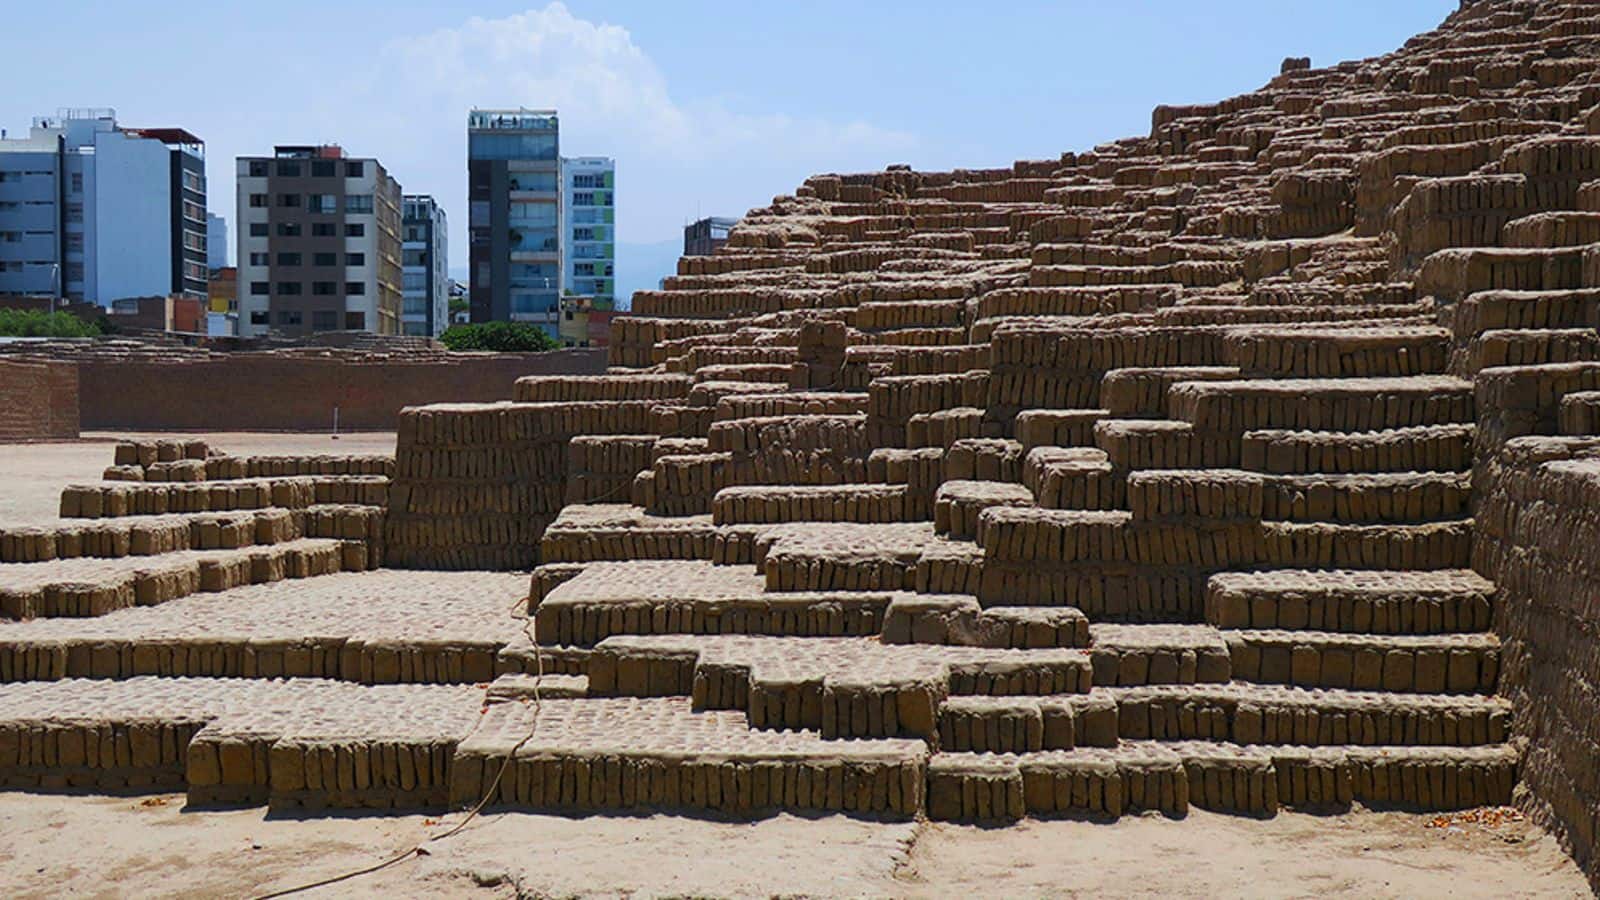 Explore Lima's ancient heart with this travel guide